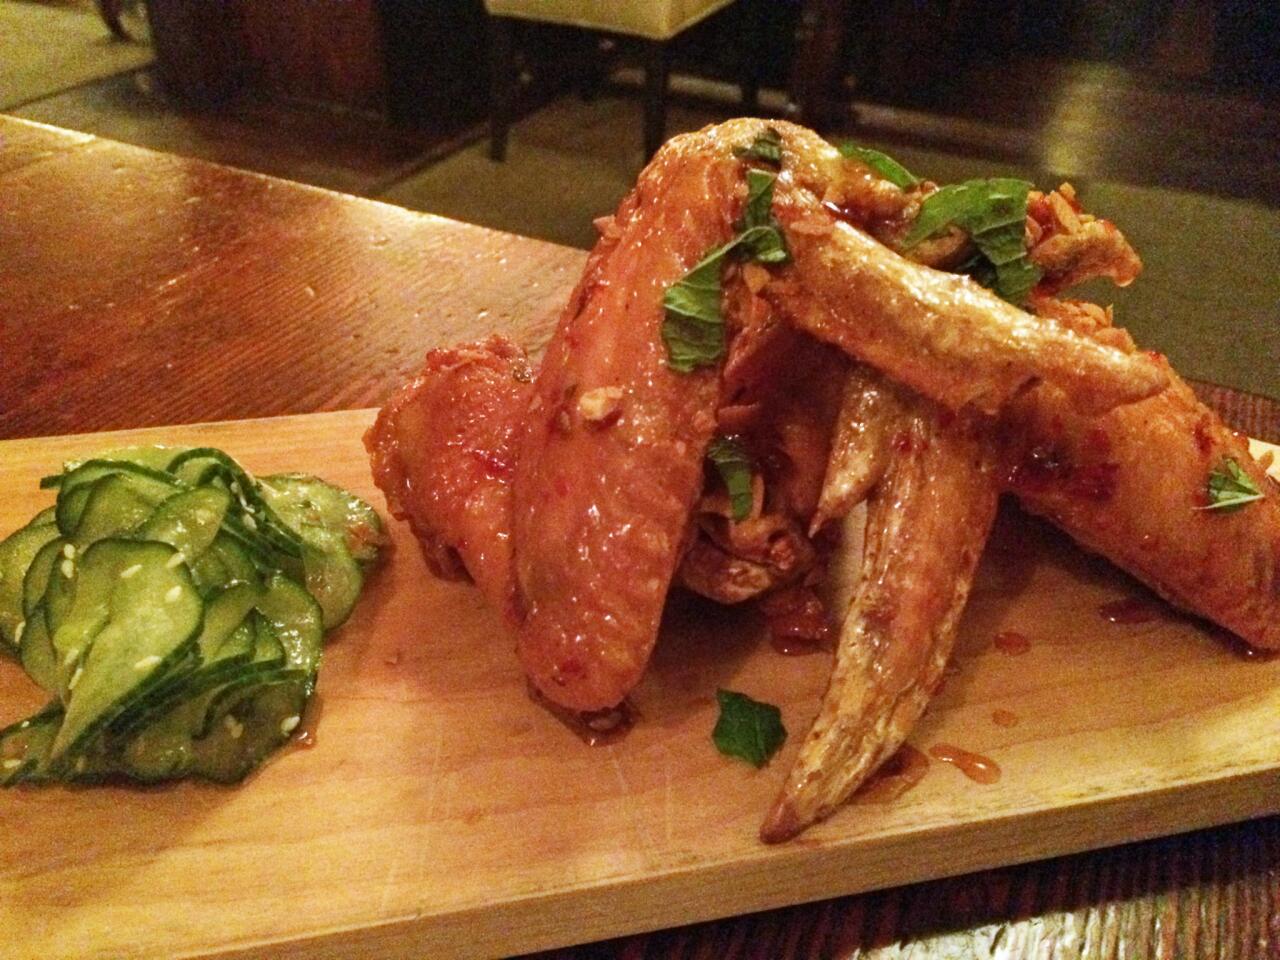 The Jidori chicken wings with pickled cucumber at the Raymond.